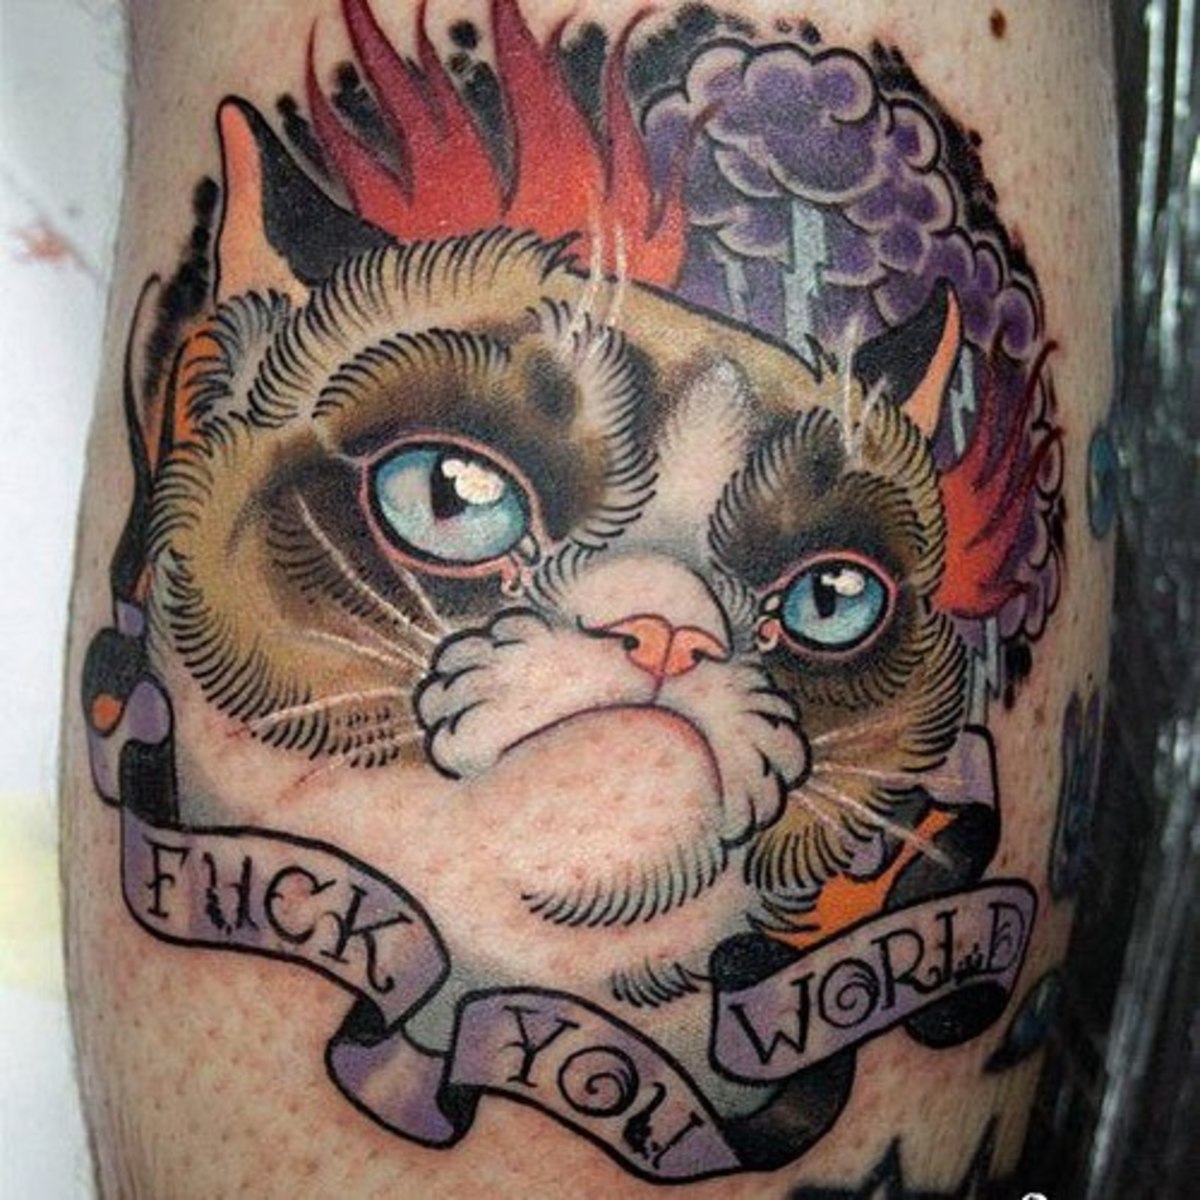 Fuck-You-World-Banner-Morcos-Cat-Tattoo